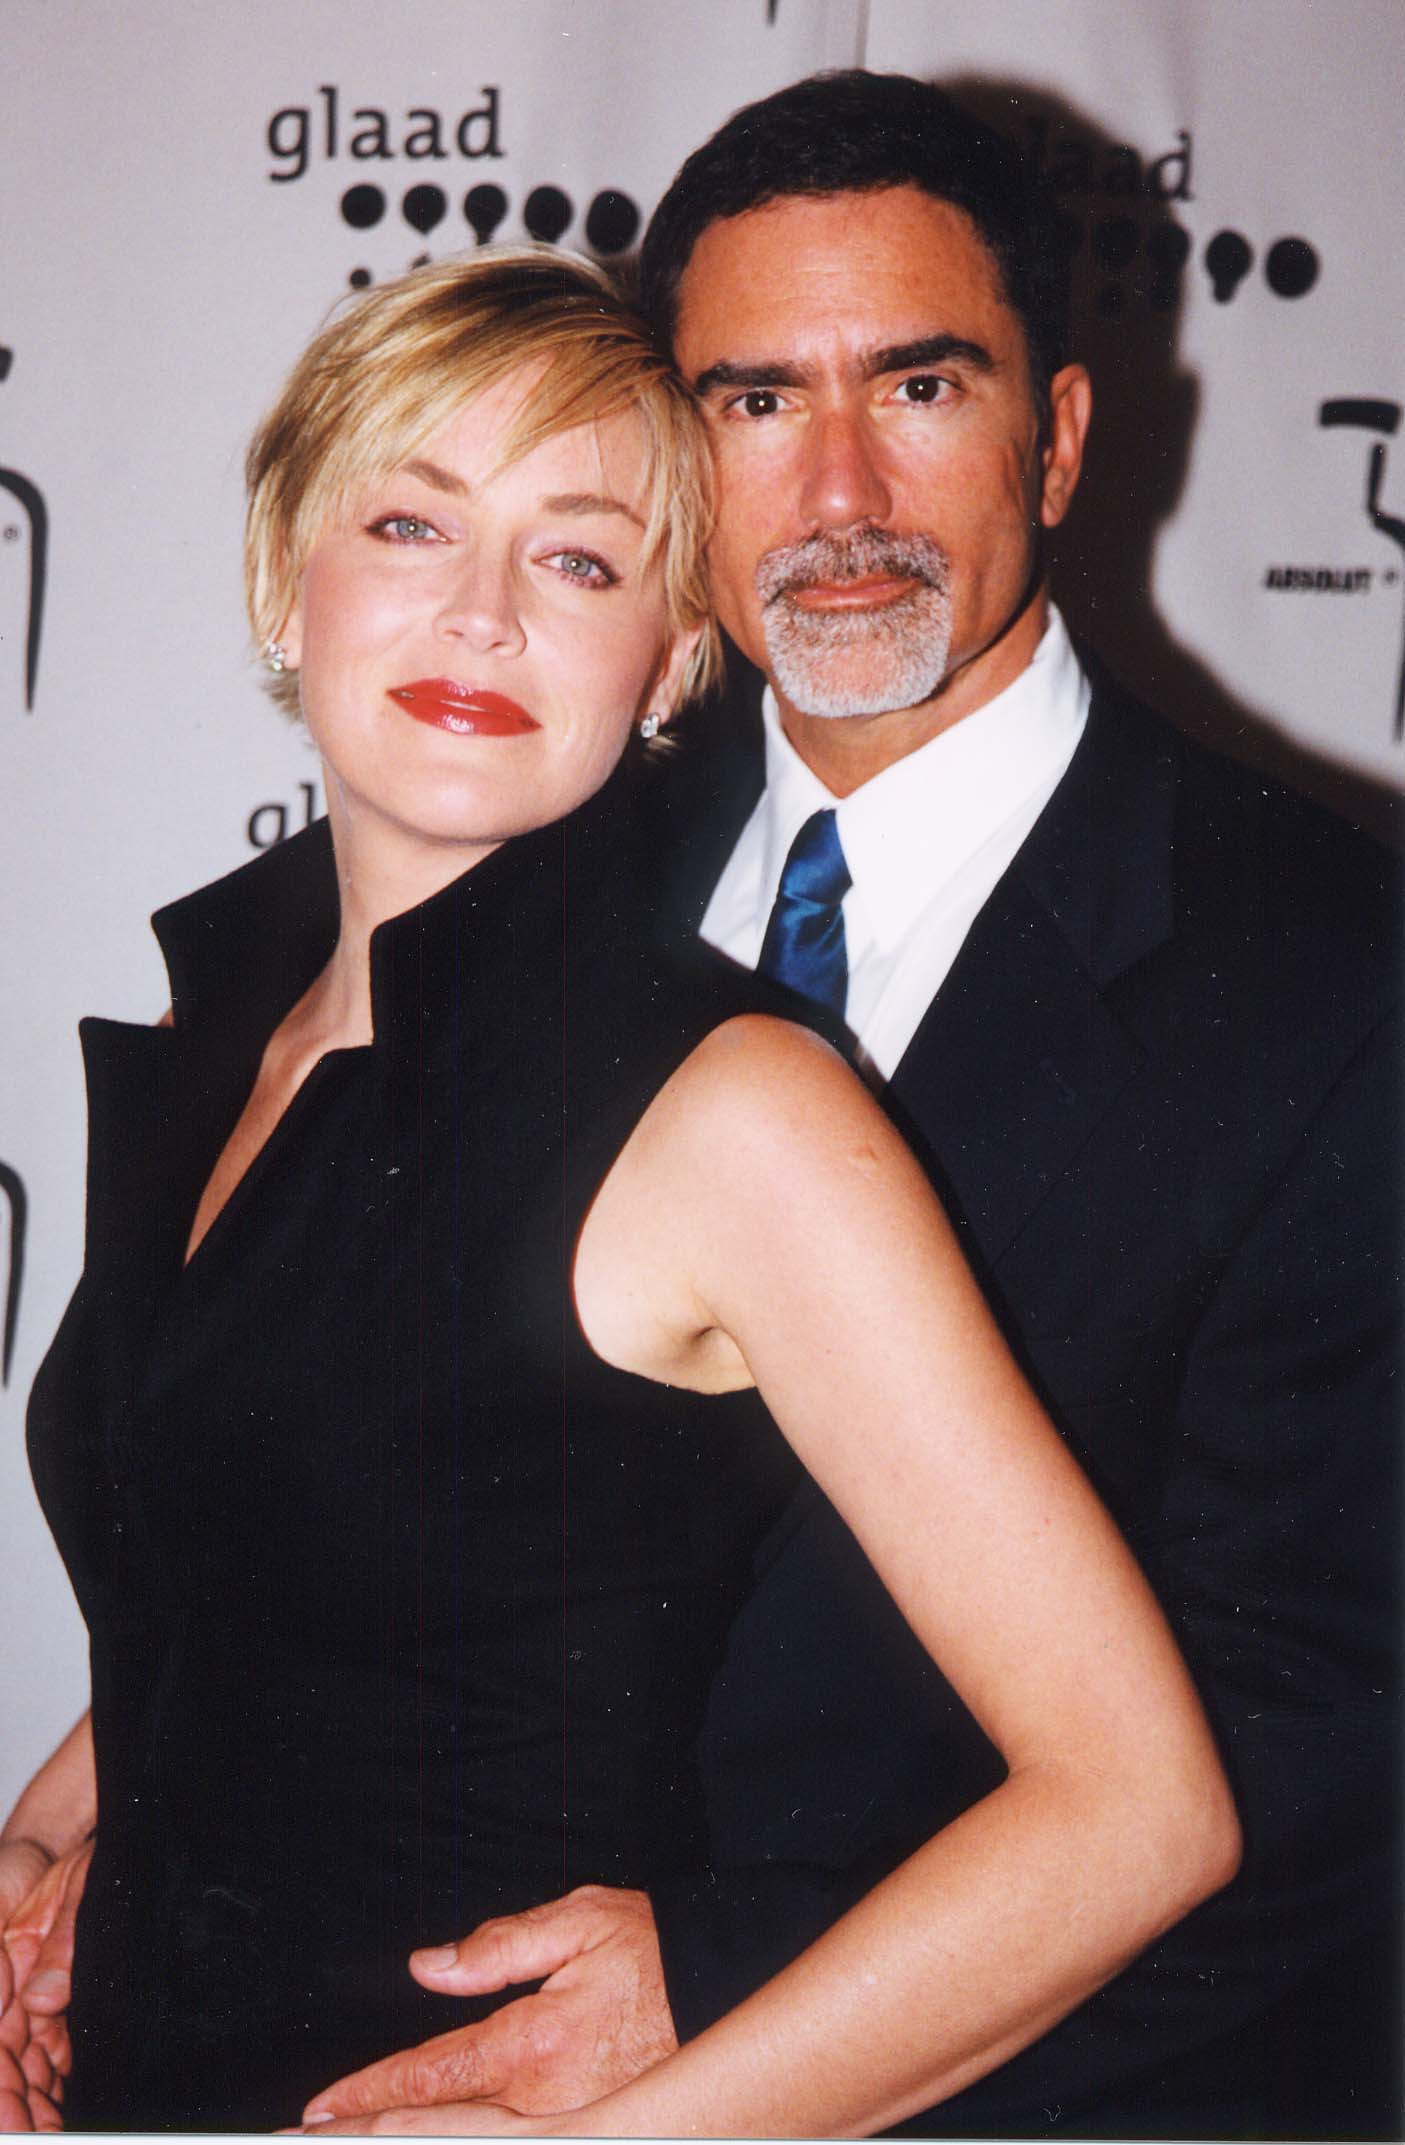 Sharon Stone and Phil Bronstein during GLAAD Media Awards 2000 at Century Plaza Hotel in Los Angeles, California, United States. | Source: Getty Images